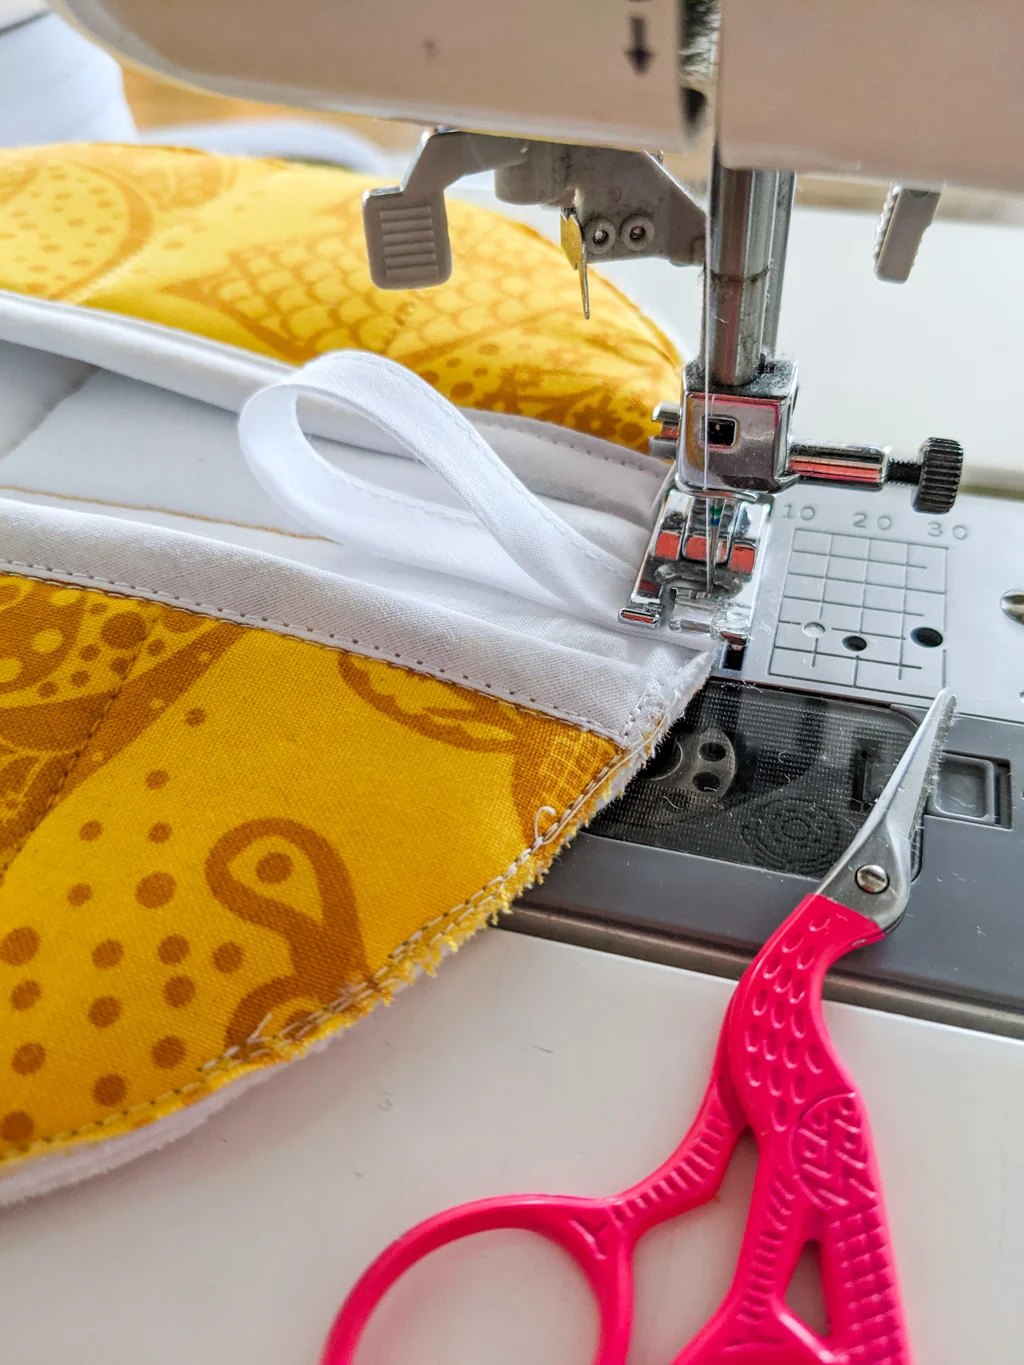 Sewing binding tape onto a round potholder for a hook